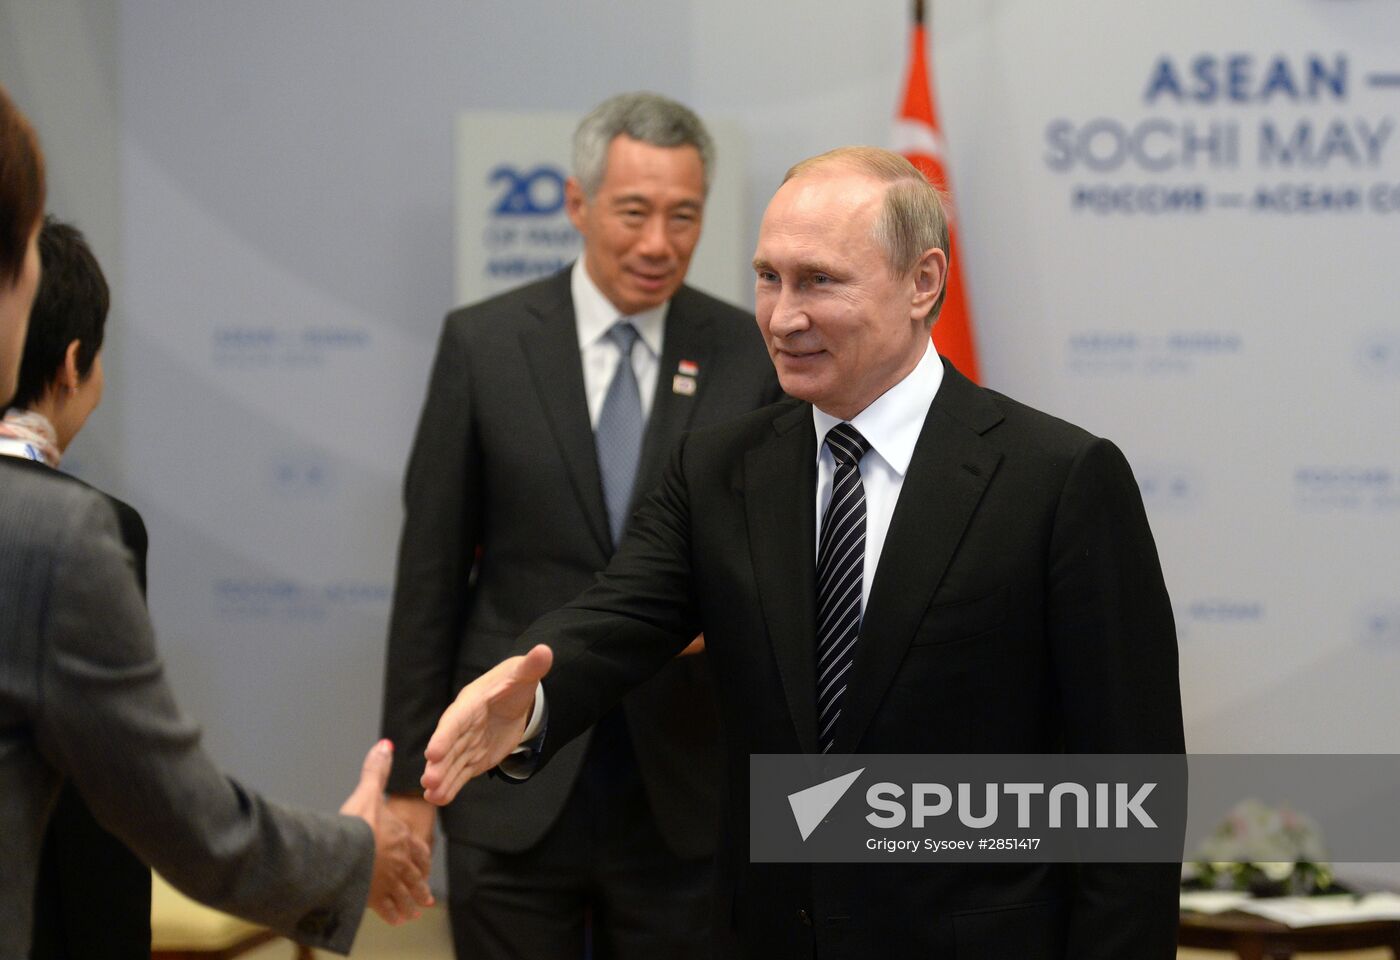 Russian President Vladimir Putin's bilateral meeting with Prime Minister of Singapore Lee Hsien Loong